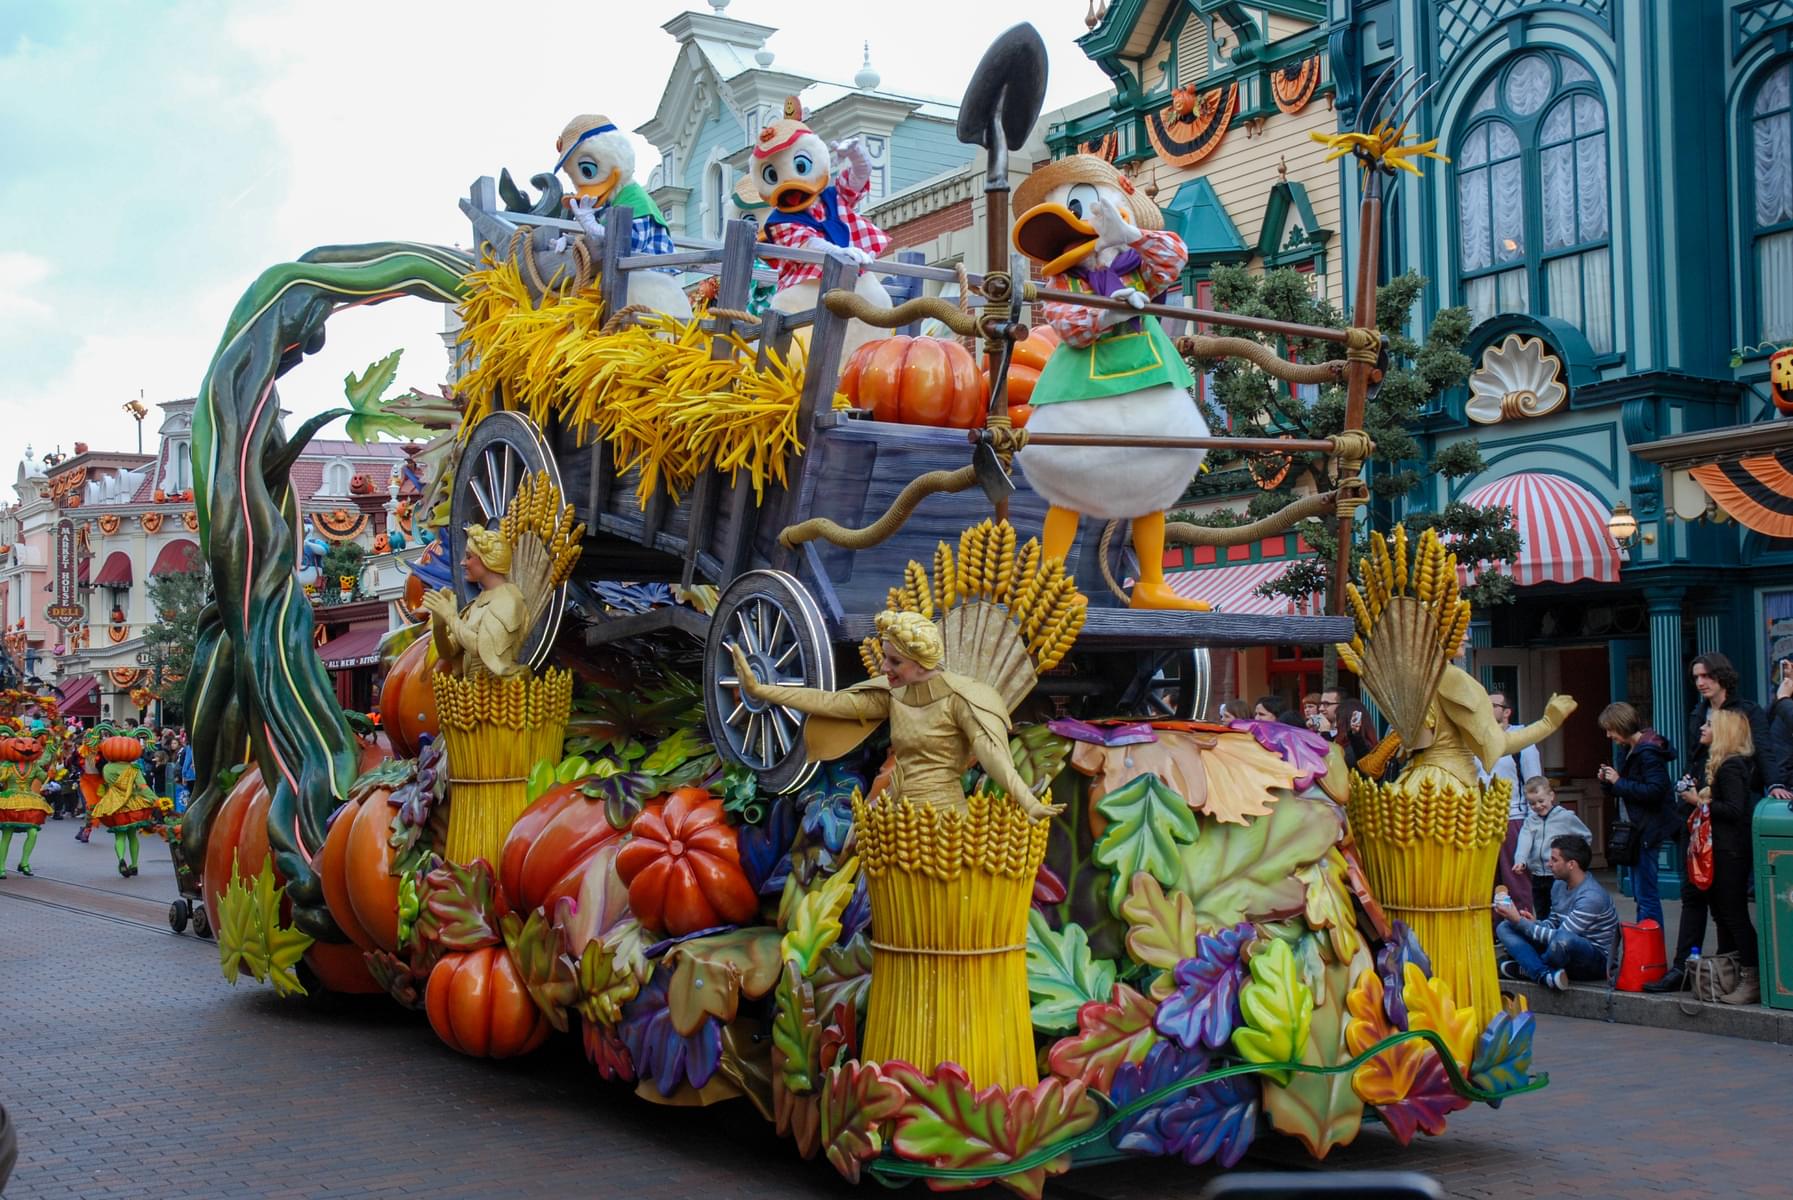 Amazing parade by Disney characters